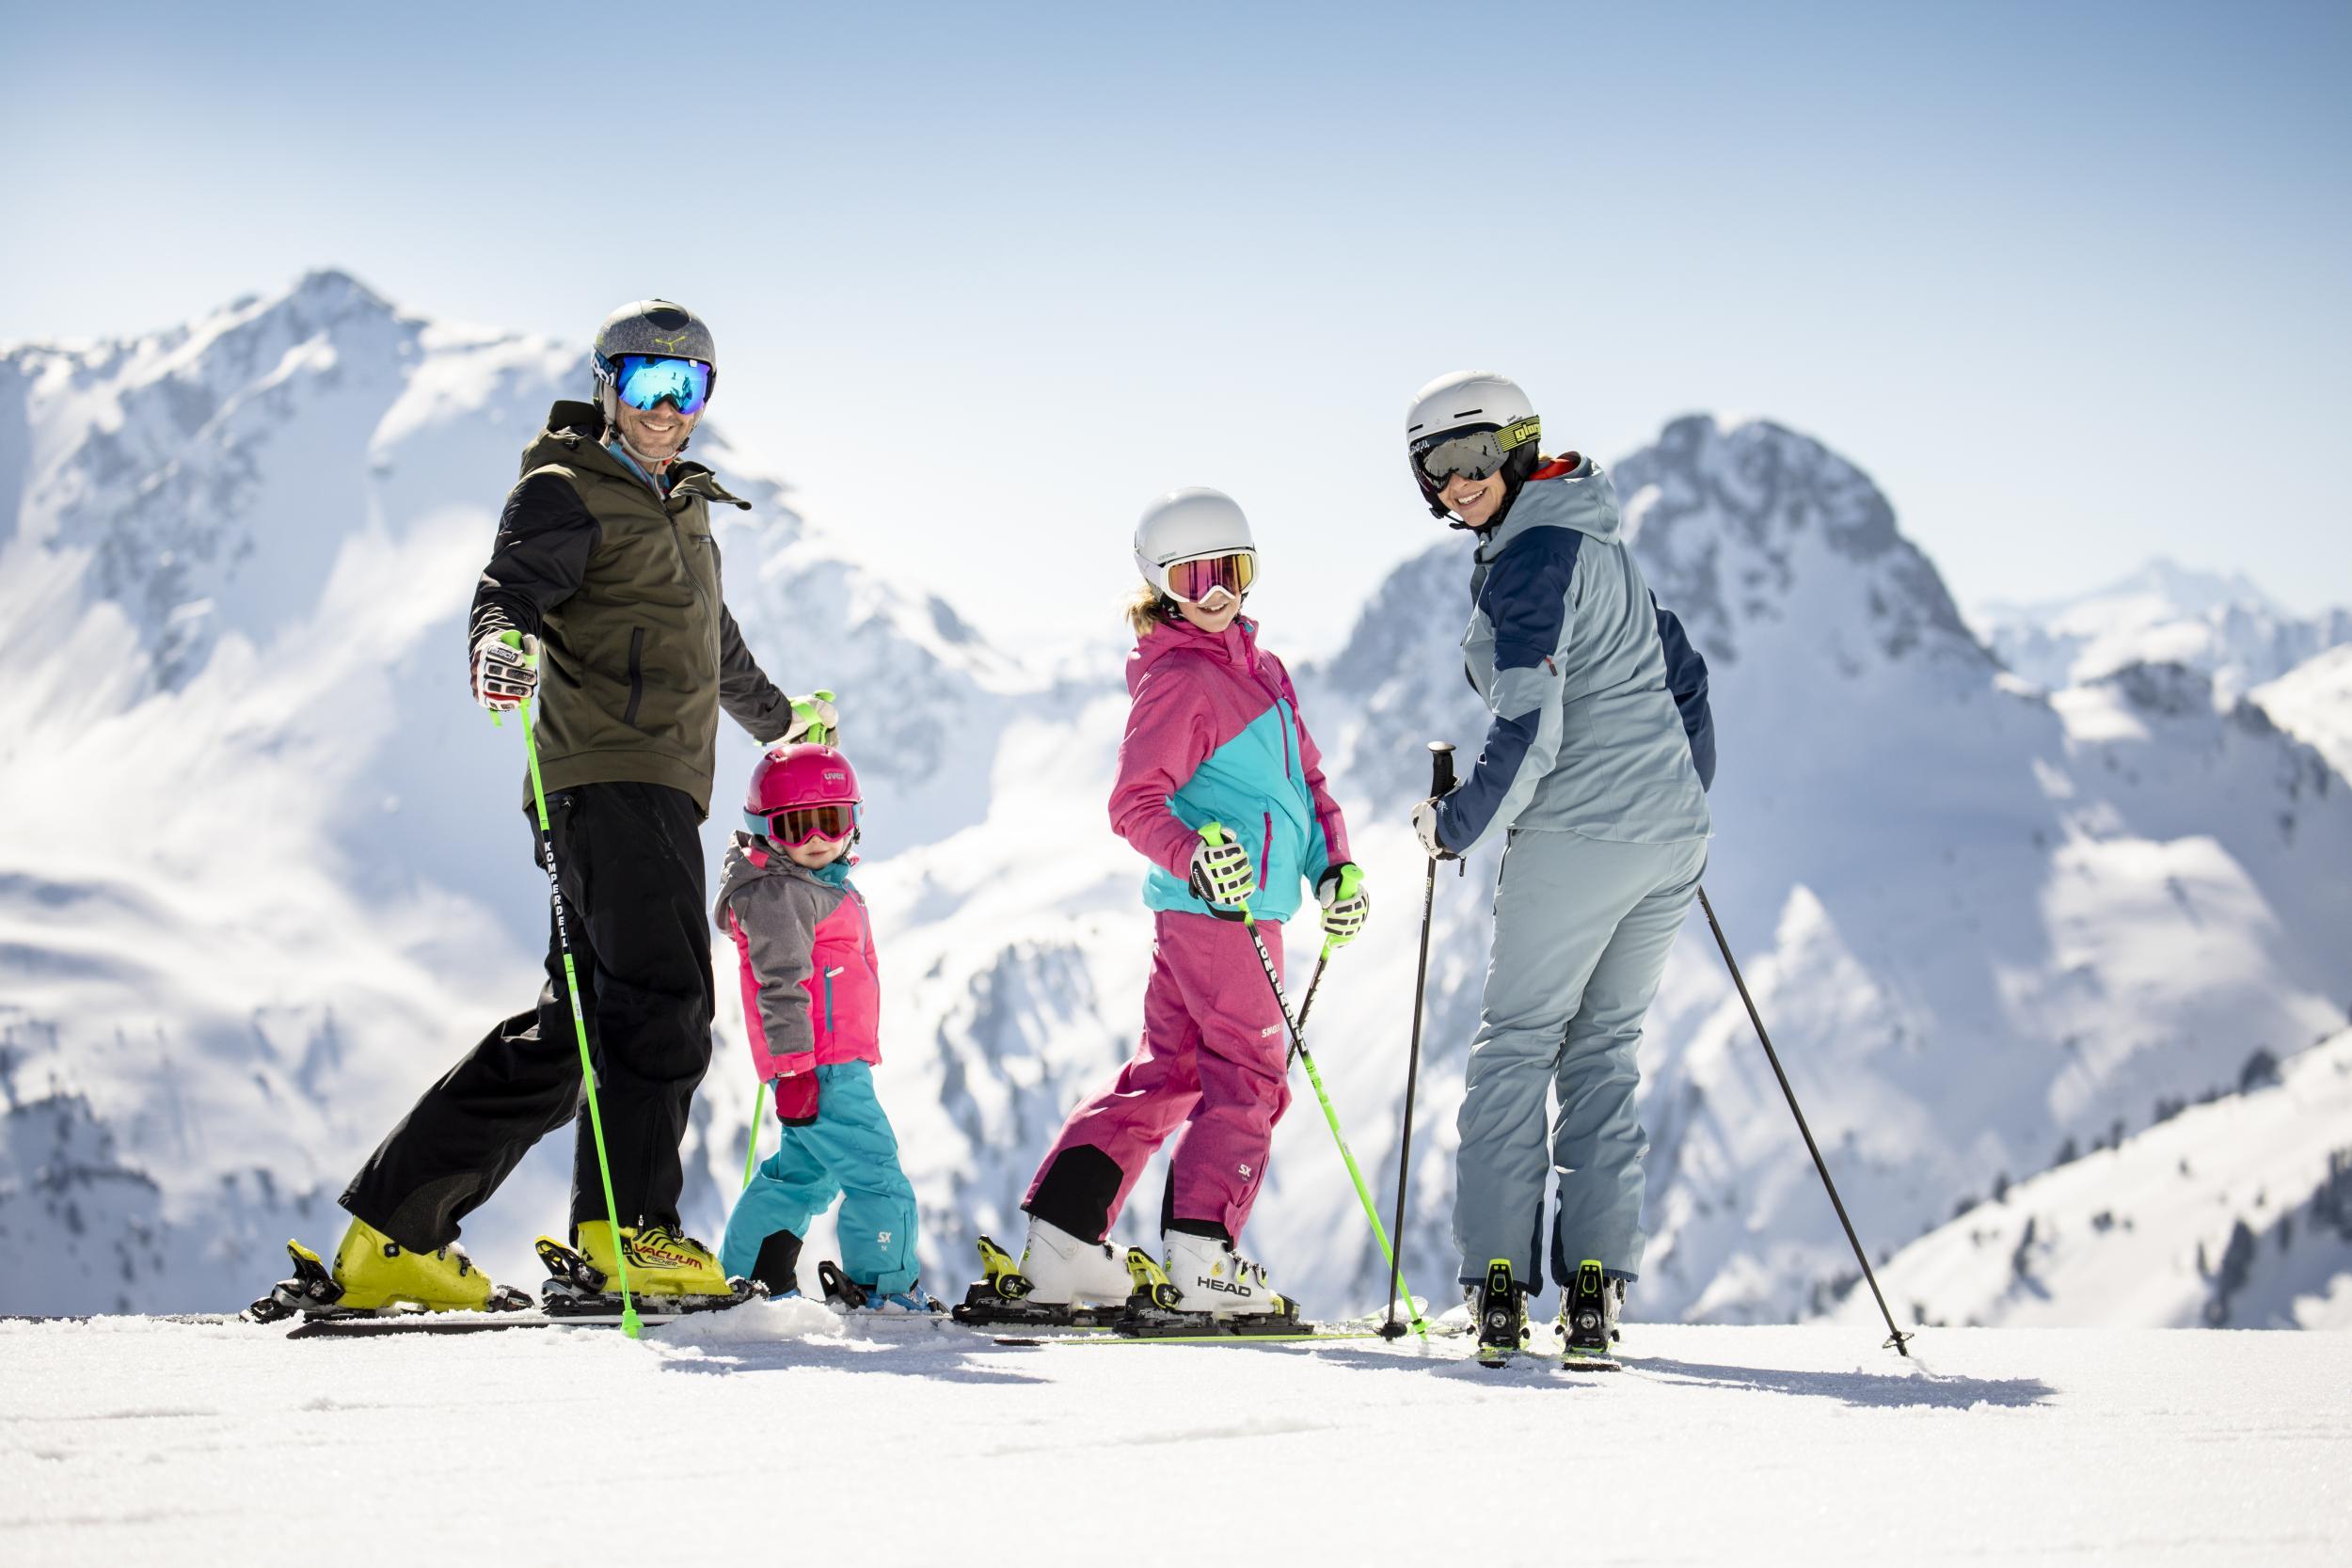 Whatever your level of experience, there's plenty of skiing to be had in Ski Juwel